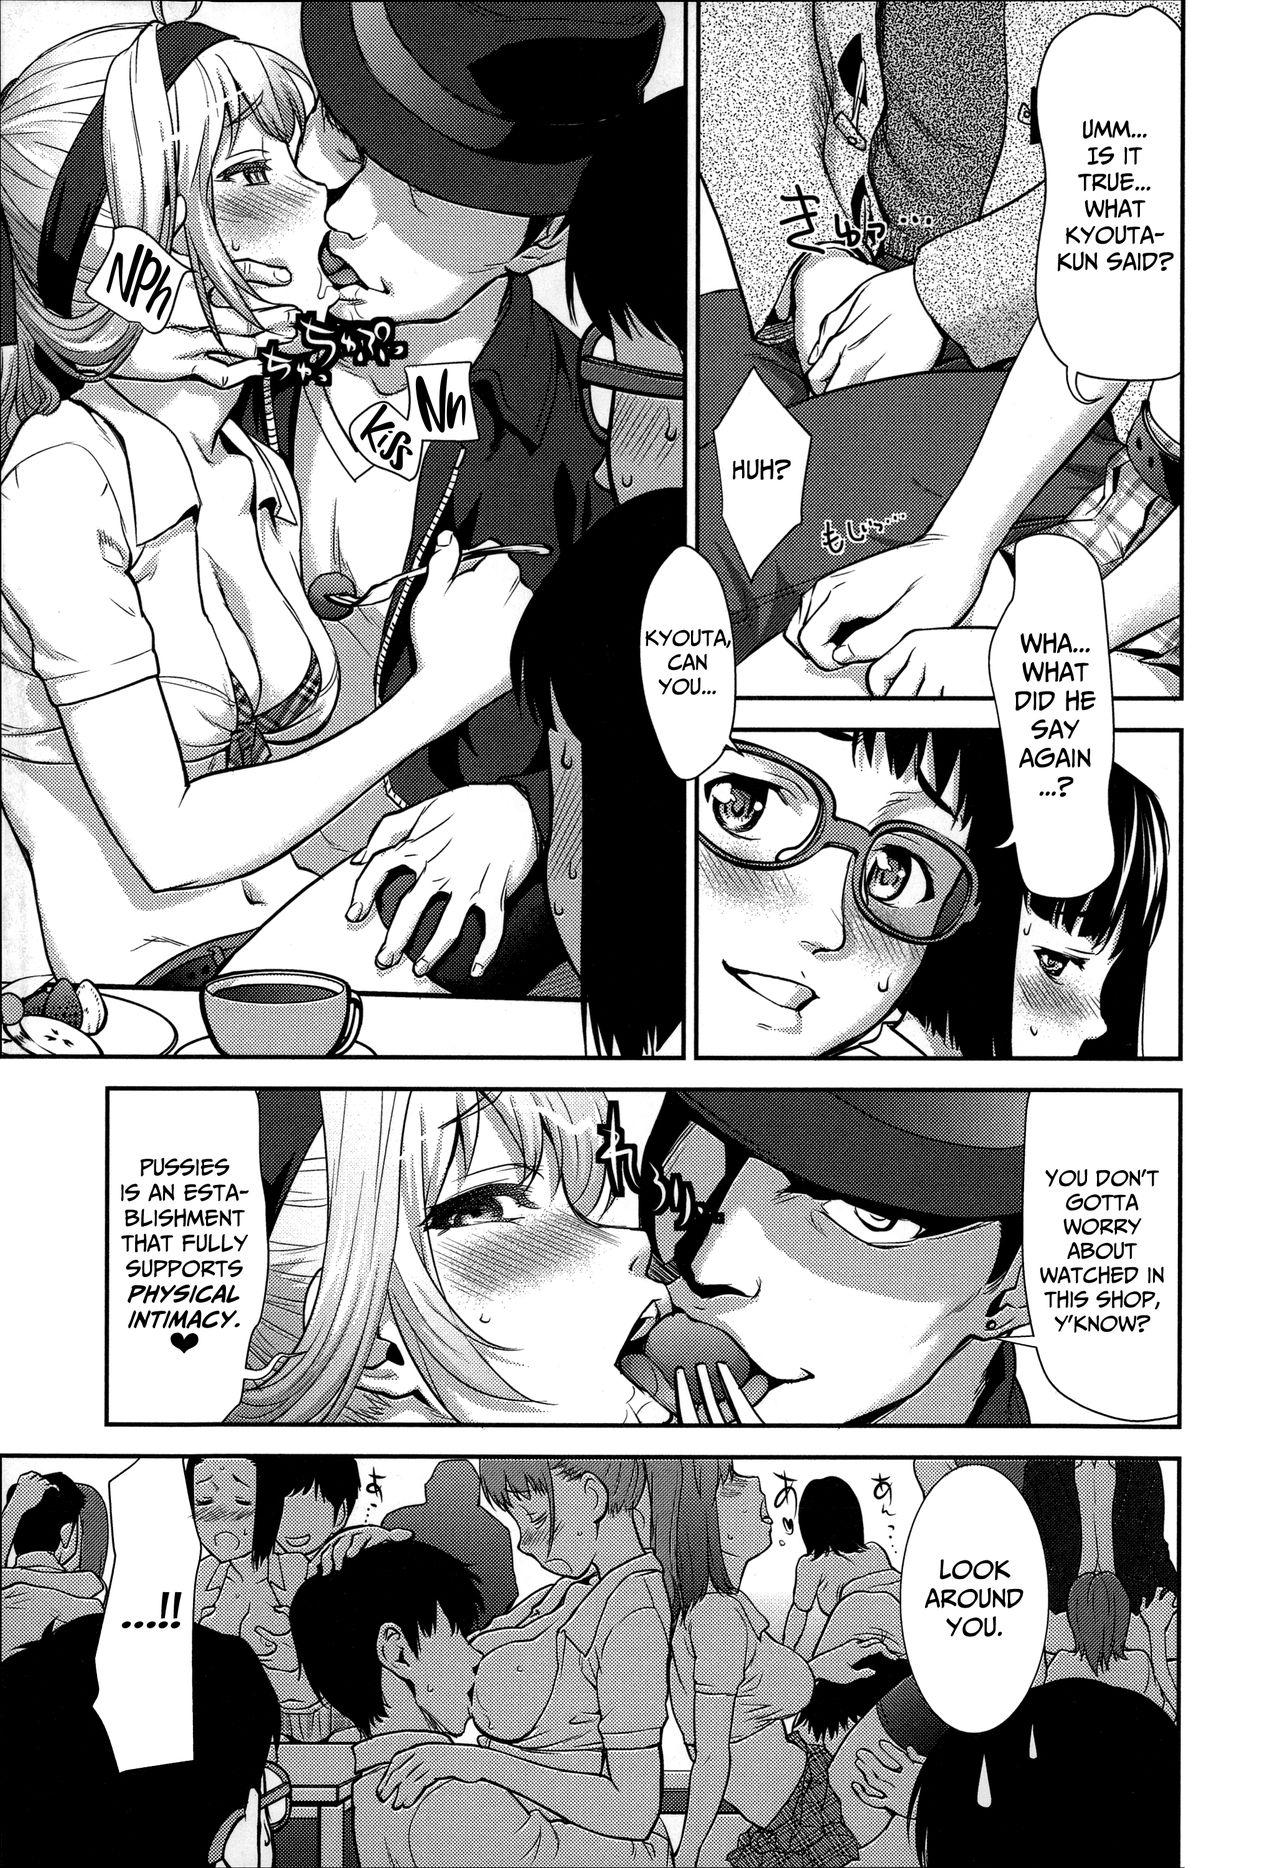 Slut Porn Pussies e Youkoso! | Welcome to Pussies! Young Men - Page 7